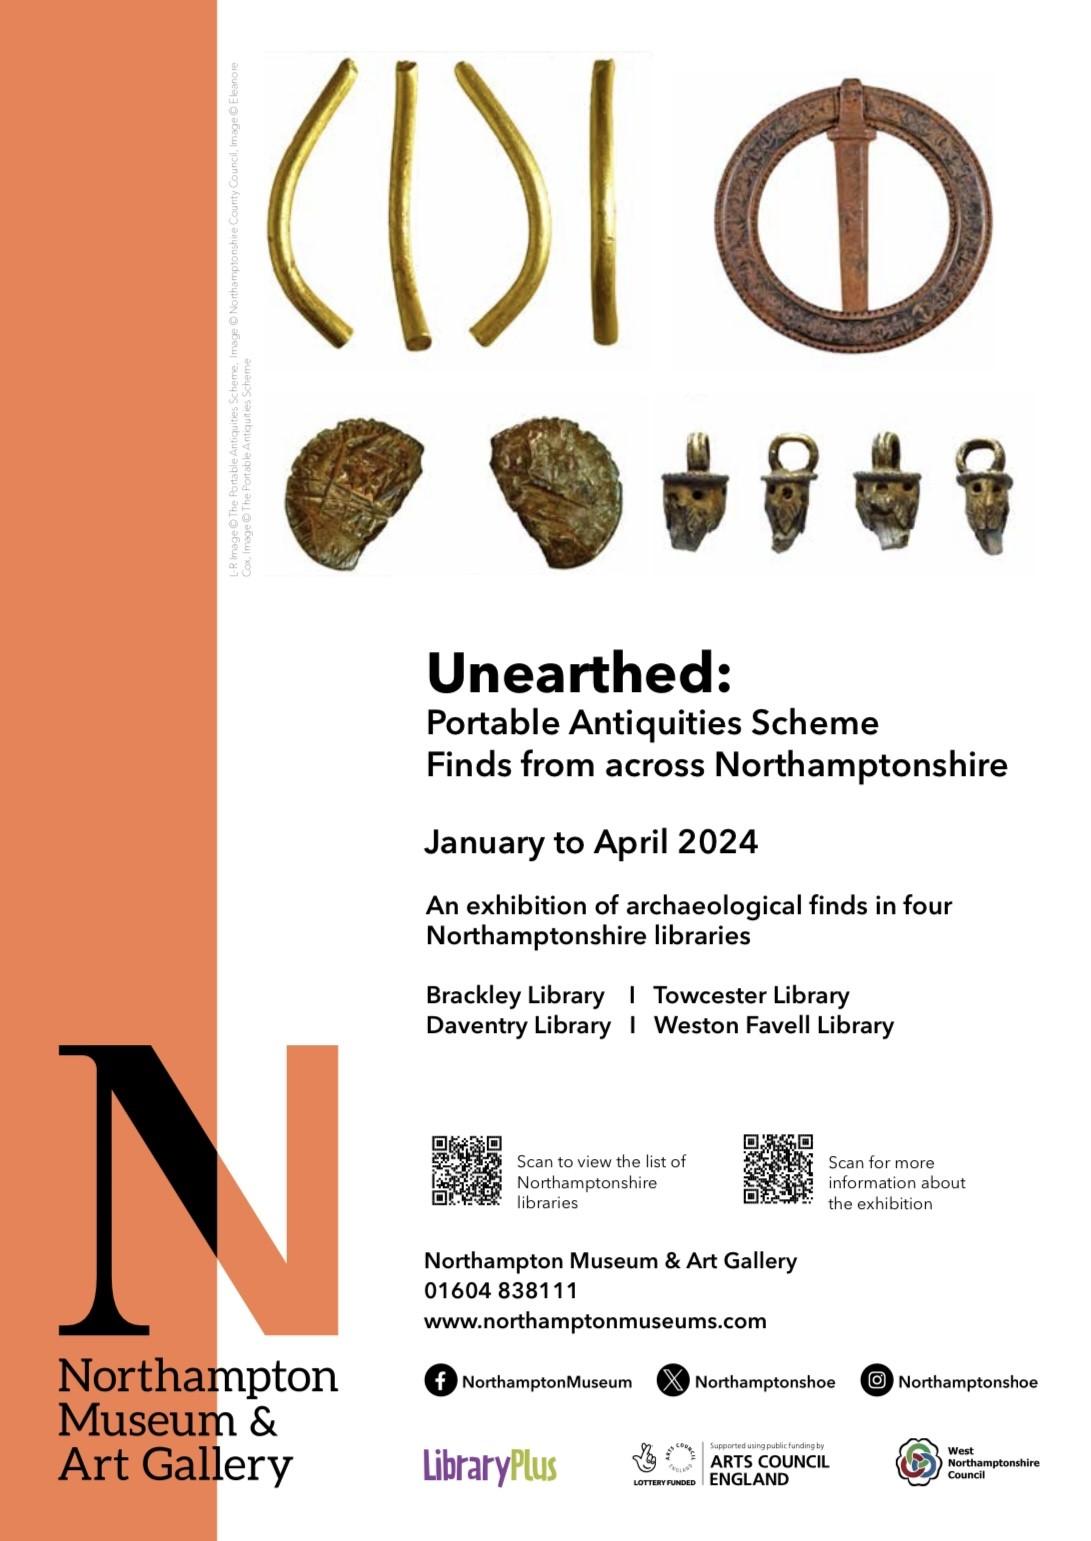 image link to Unearthed: Portable Antiquities Scheme finds from Across Northamptonshire page.